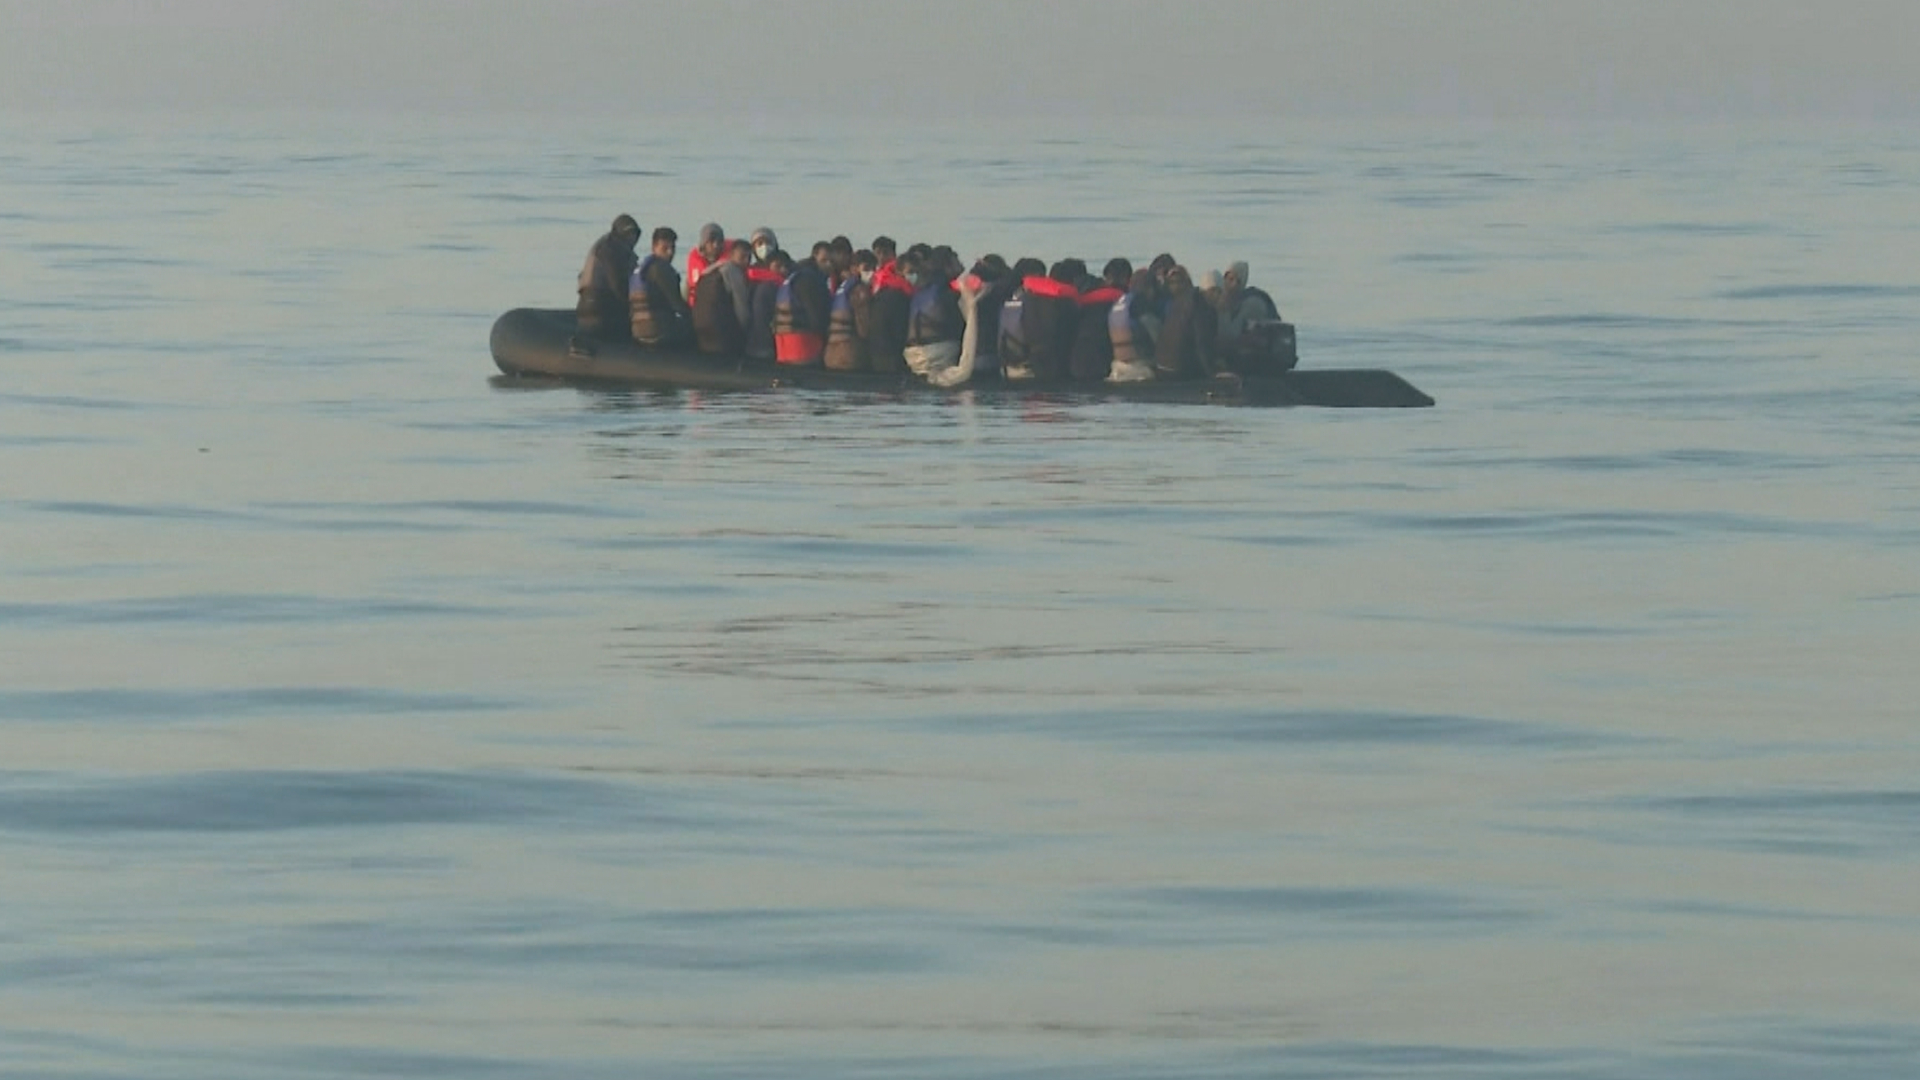 The announcement follows a sharp rise in migrants crossing the English Channel by small boats.